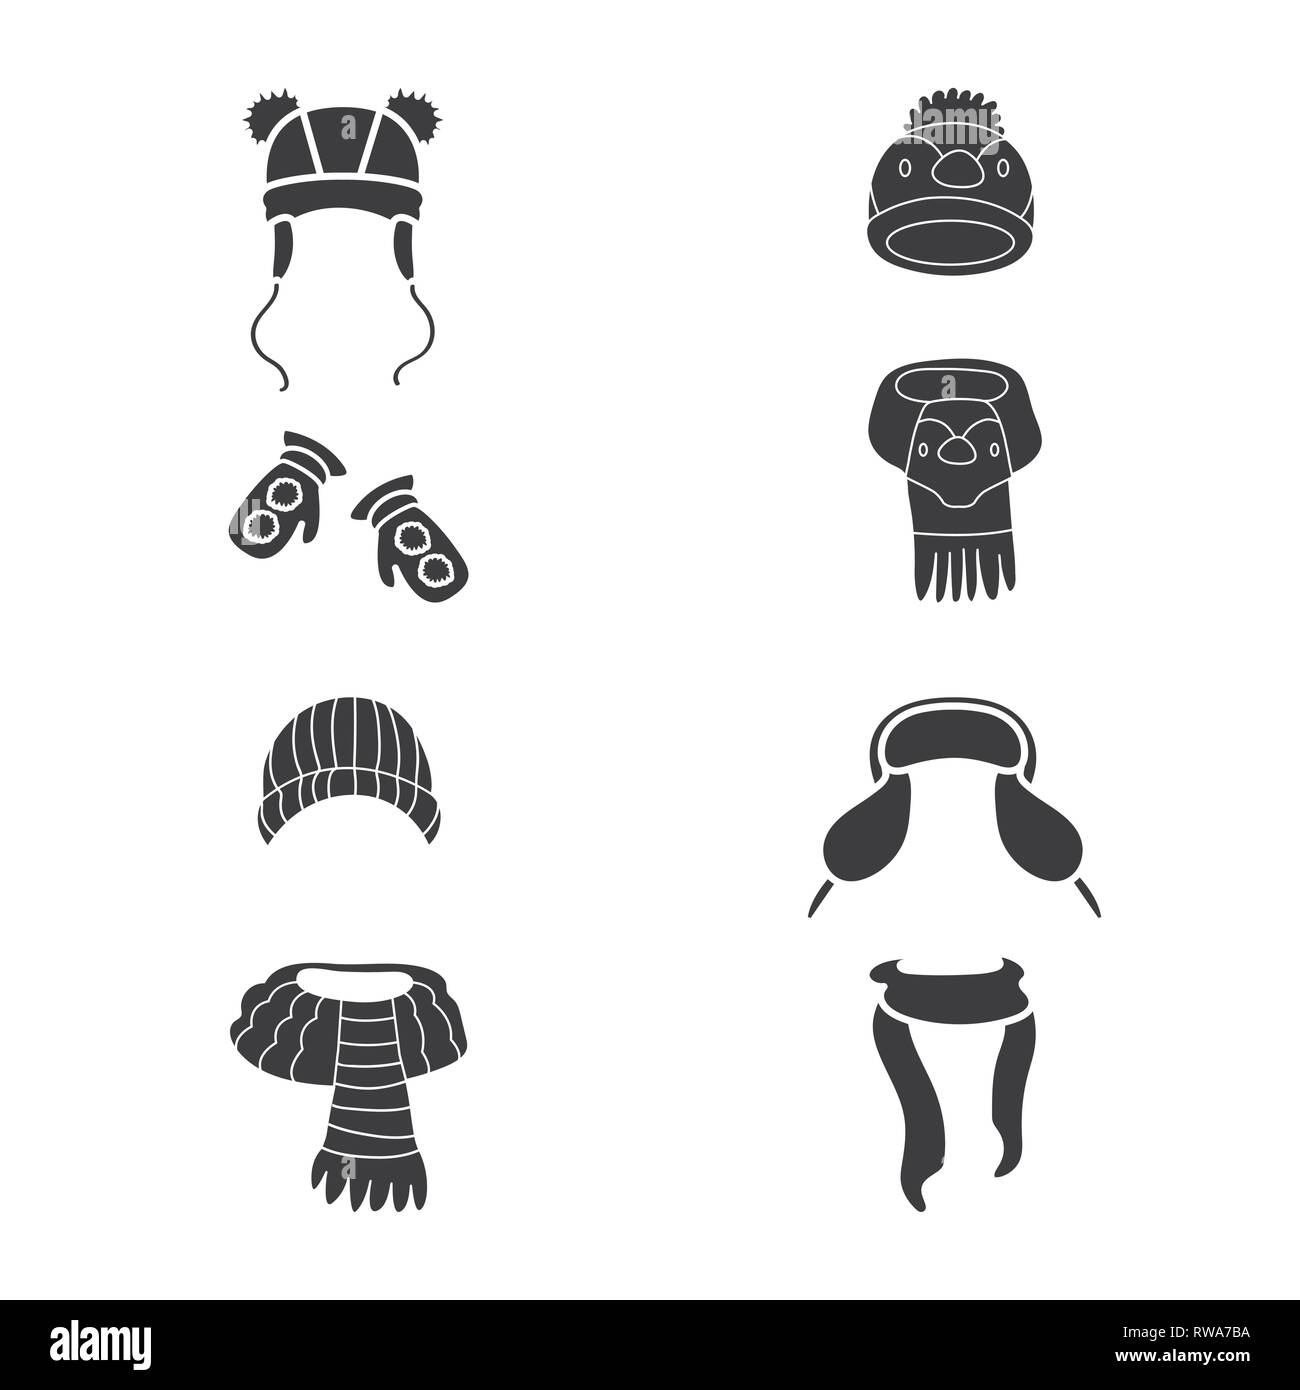 hat,pompom,scarf,fur,mitten,green,kids,wool,head,penguin,cap,knitted,blue,apparel,beanie,hand,outfit,girl,fabric,weather,headwear,fashion,winter,cold,shopping,warm,clothes,texture,set,vector,icon,illustration,isolated,collection,design,element,graphic,sign,black,simple, Vector Vectors , Stock Vector